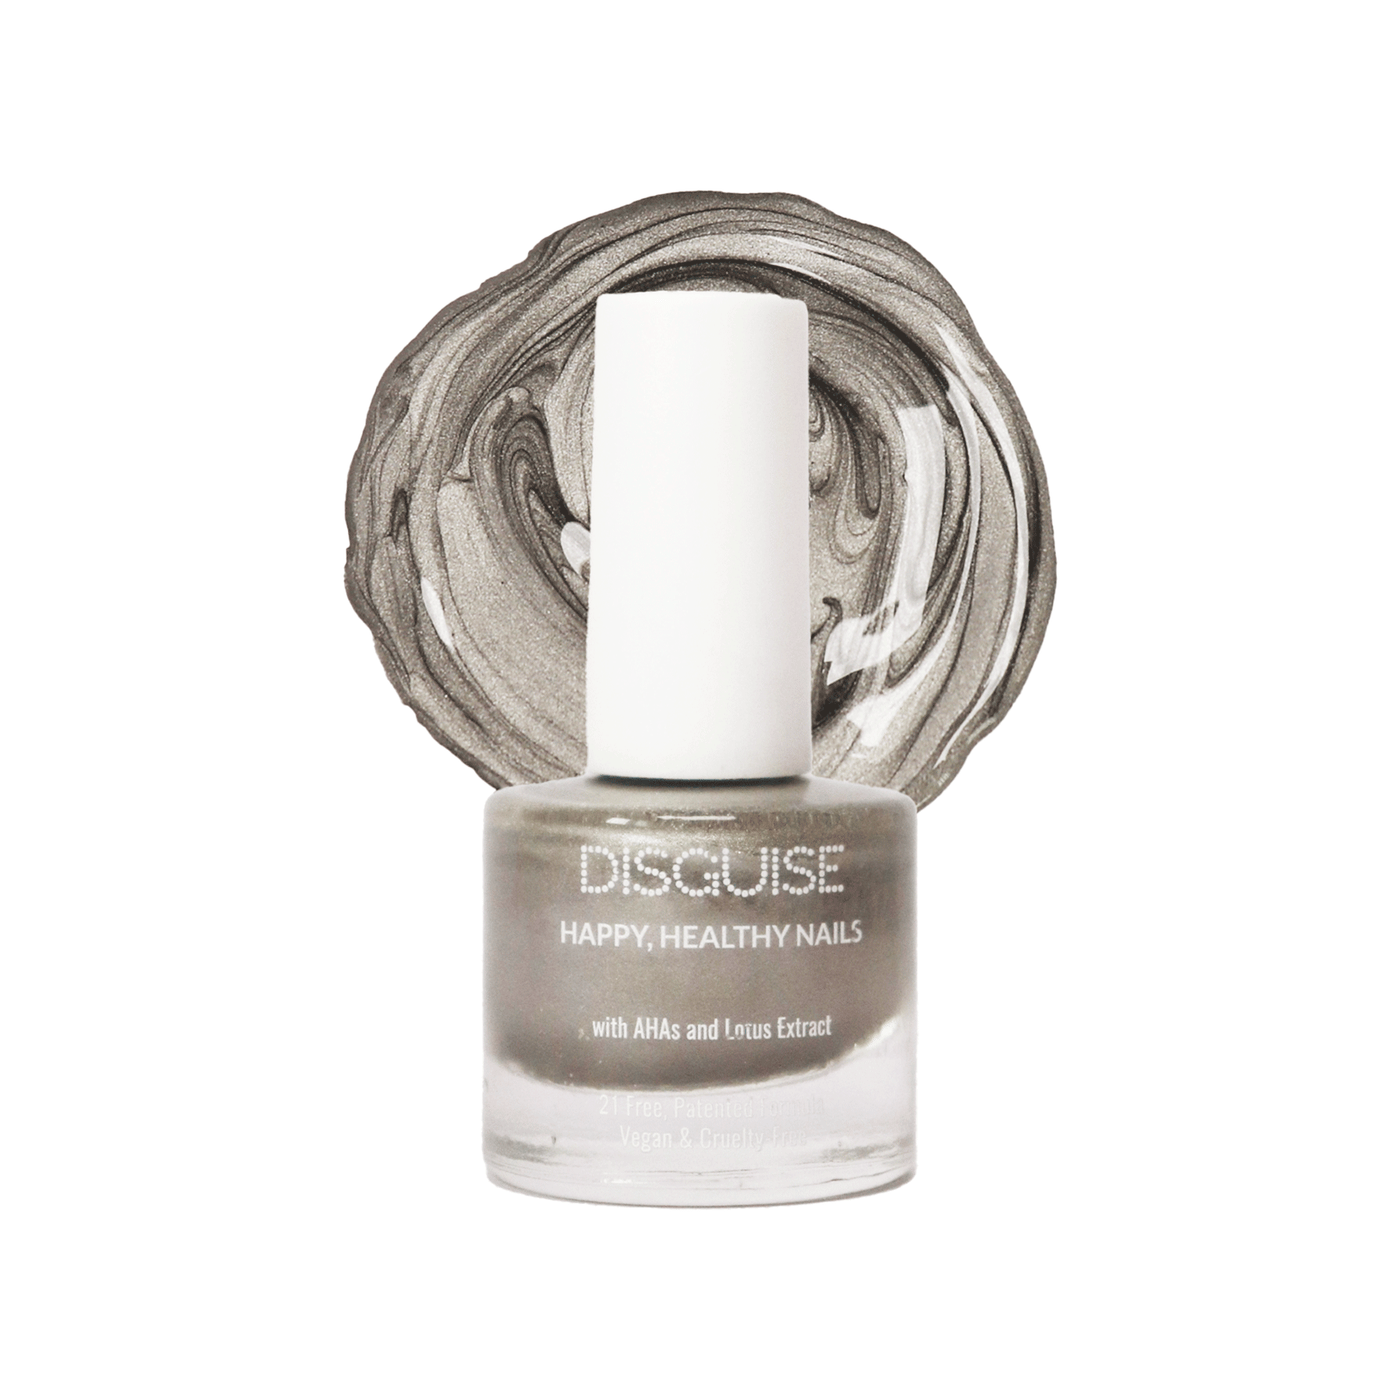 Chrome Slate 141, 21 TOXIN FREE | WITH AHA & LOTUS EXTRACT | INTENSE COLOR | 9 ml